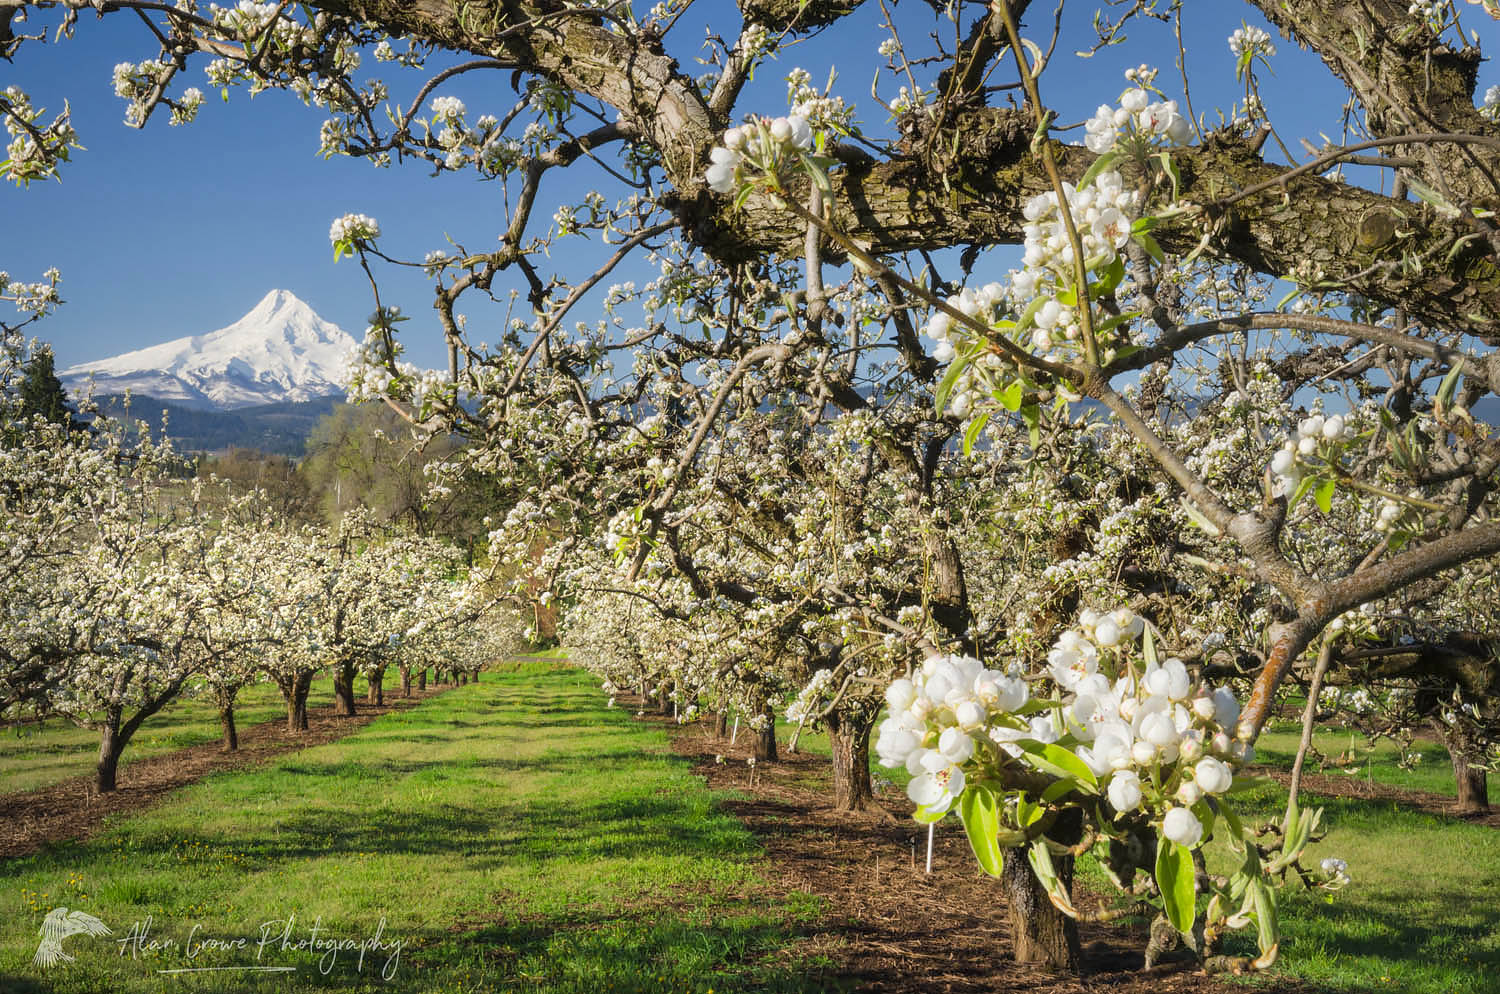 Fruit trees blooming in spring. Mount Hood, Cascade Range stratovolcano elevation 11,249 ft (3,429 m) is in the distance. Hood River Valley Orchards, Oregon #60117